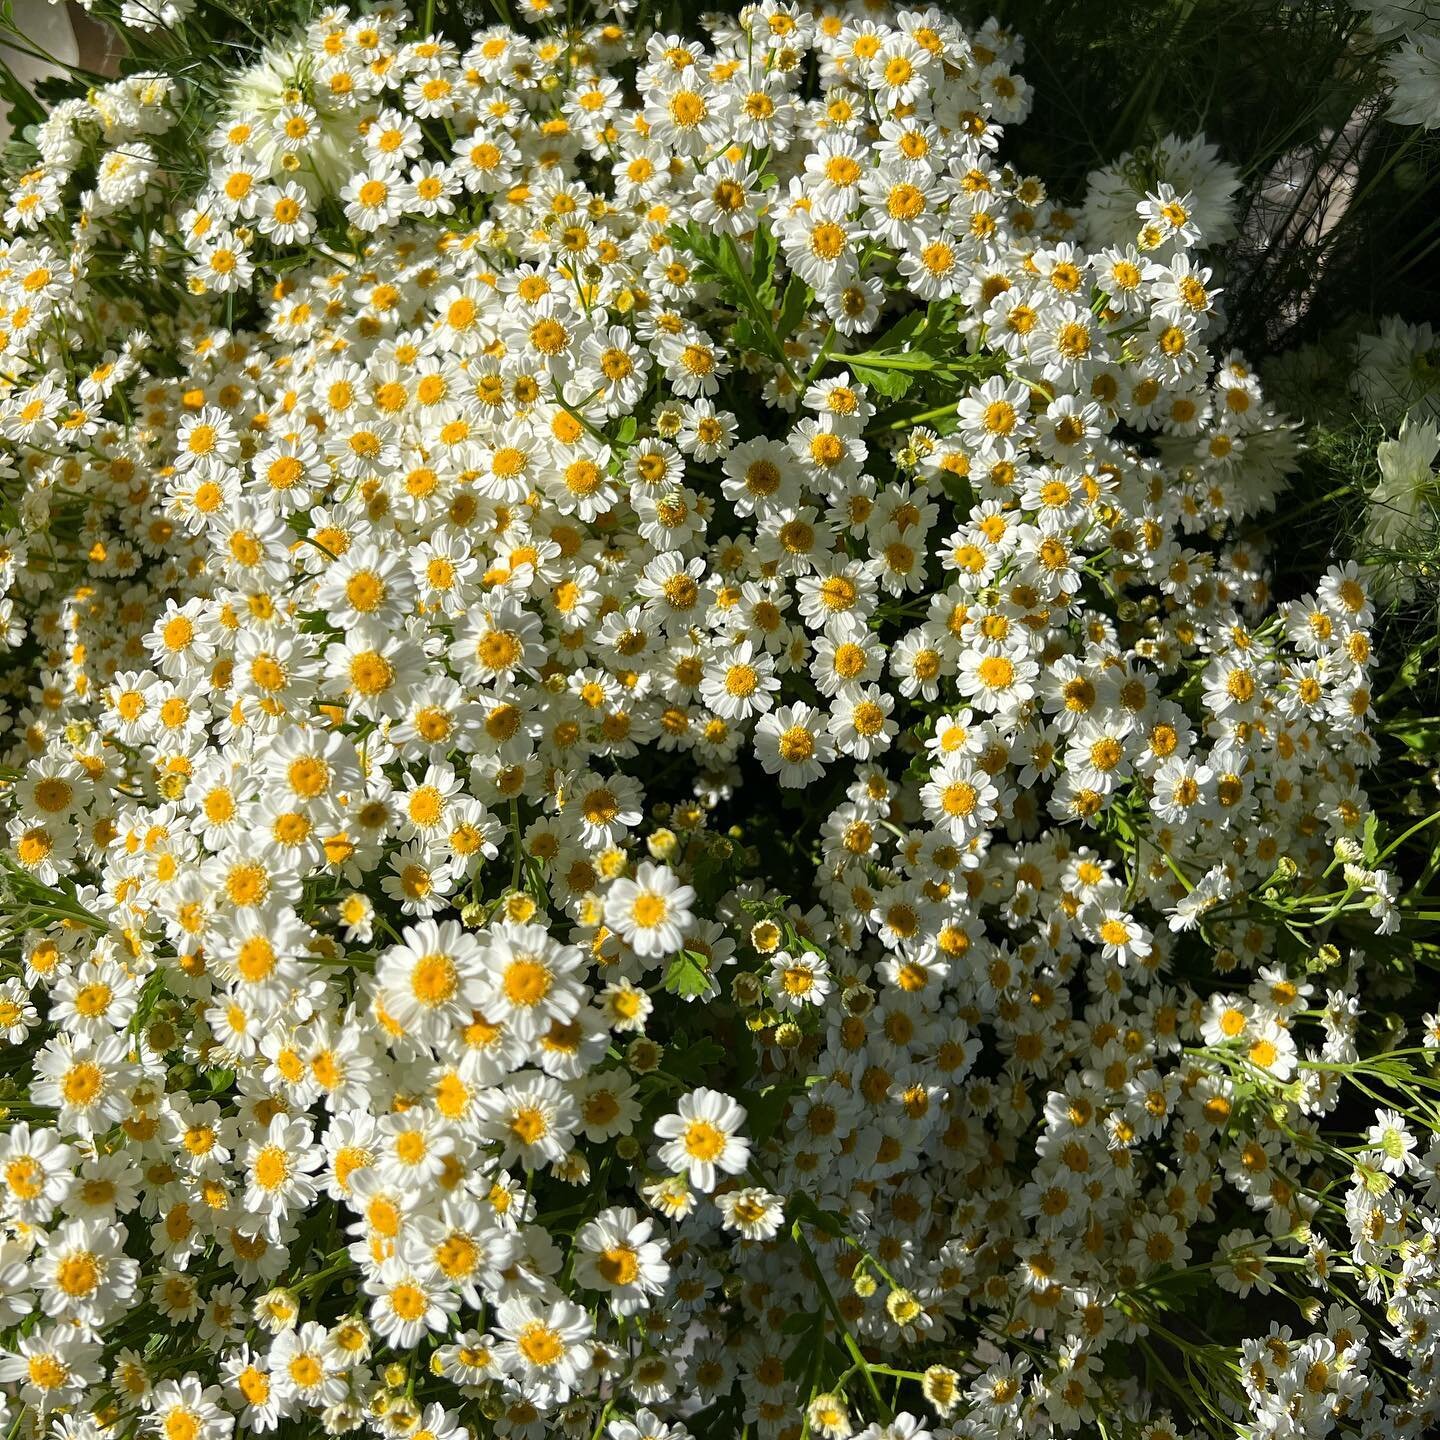 Feverfew is here 🤍 my favorite flower. The blooms are starting to really come now!
.
Swipe to see Jules @spacetwinsprovisions picking some magic singles during harvest this morning.